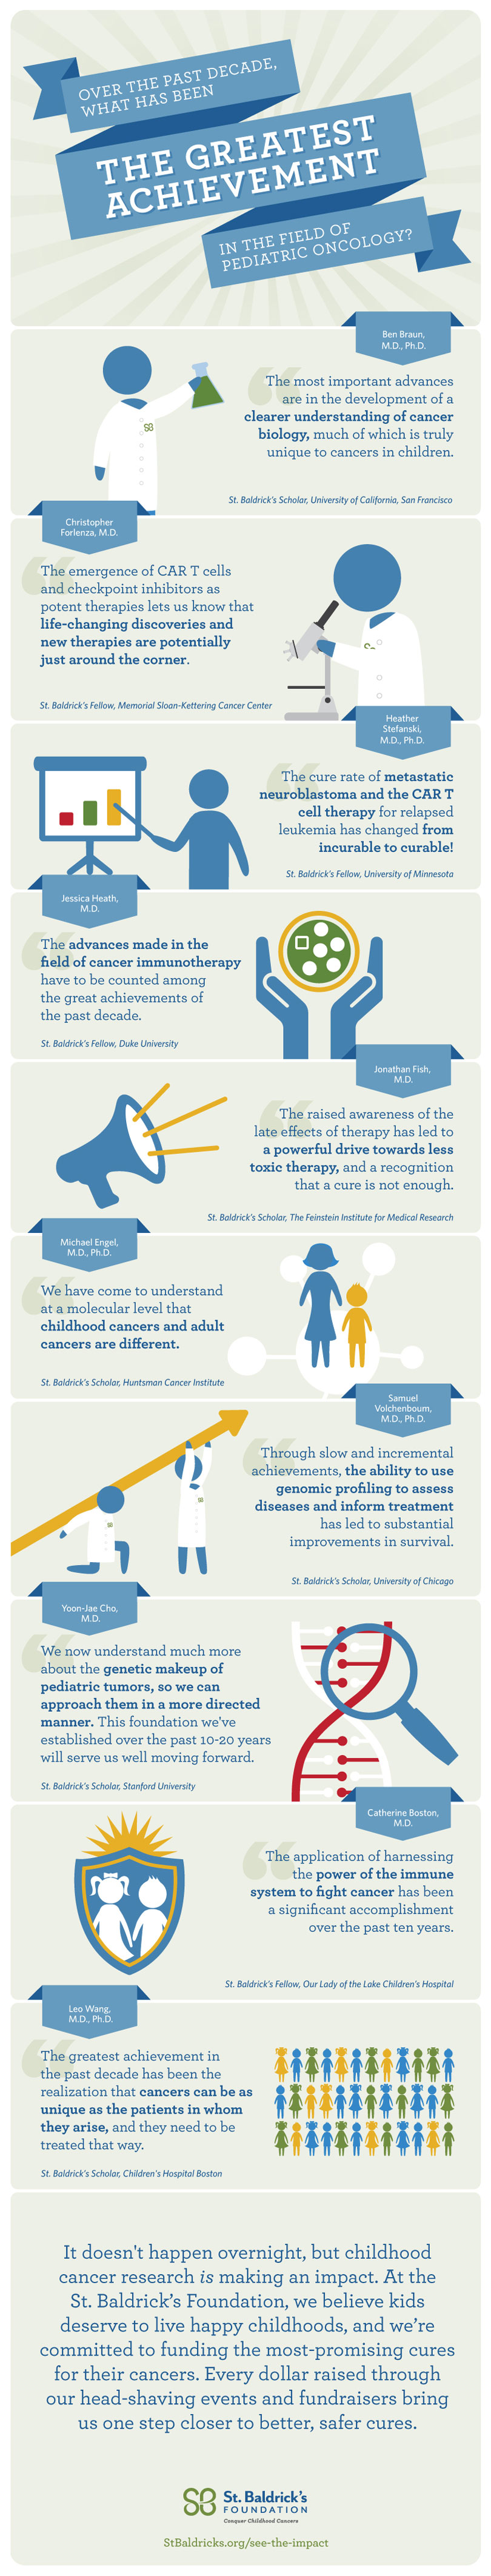 pediatric cancer research facts infographic